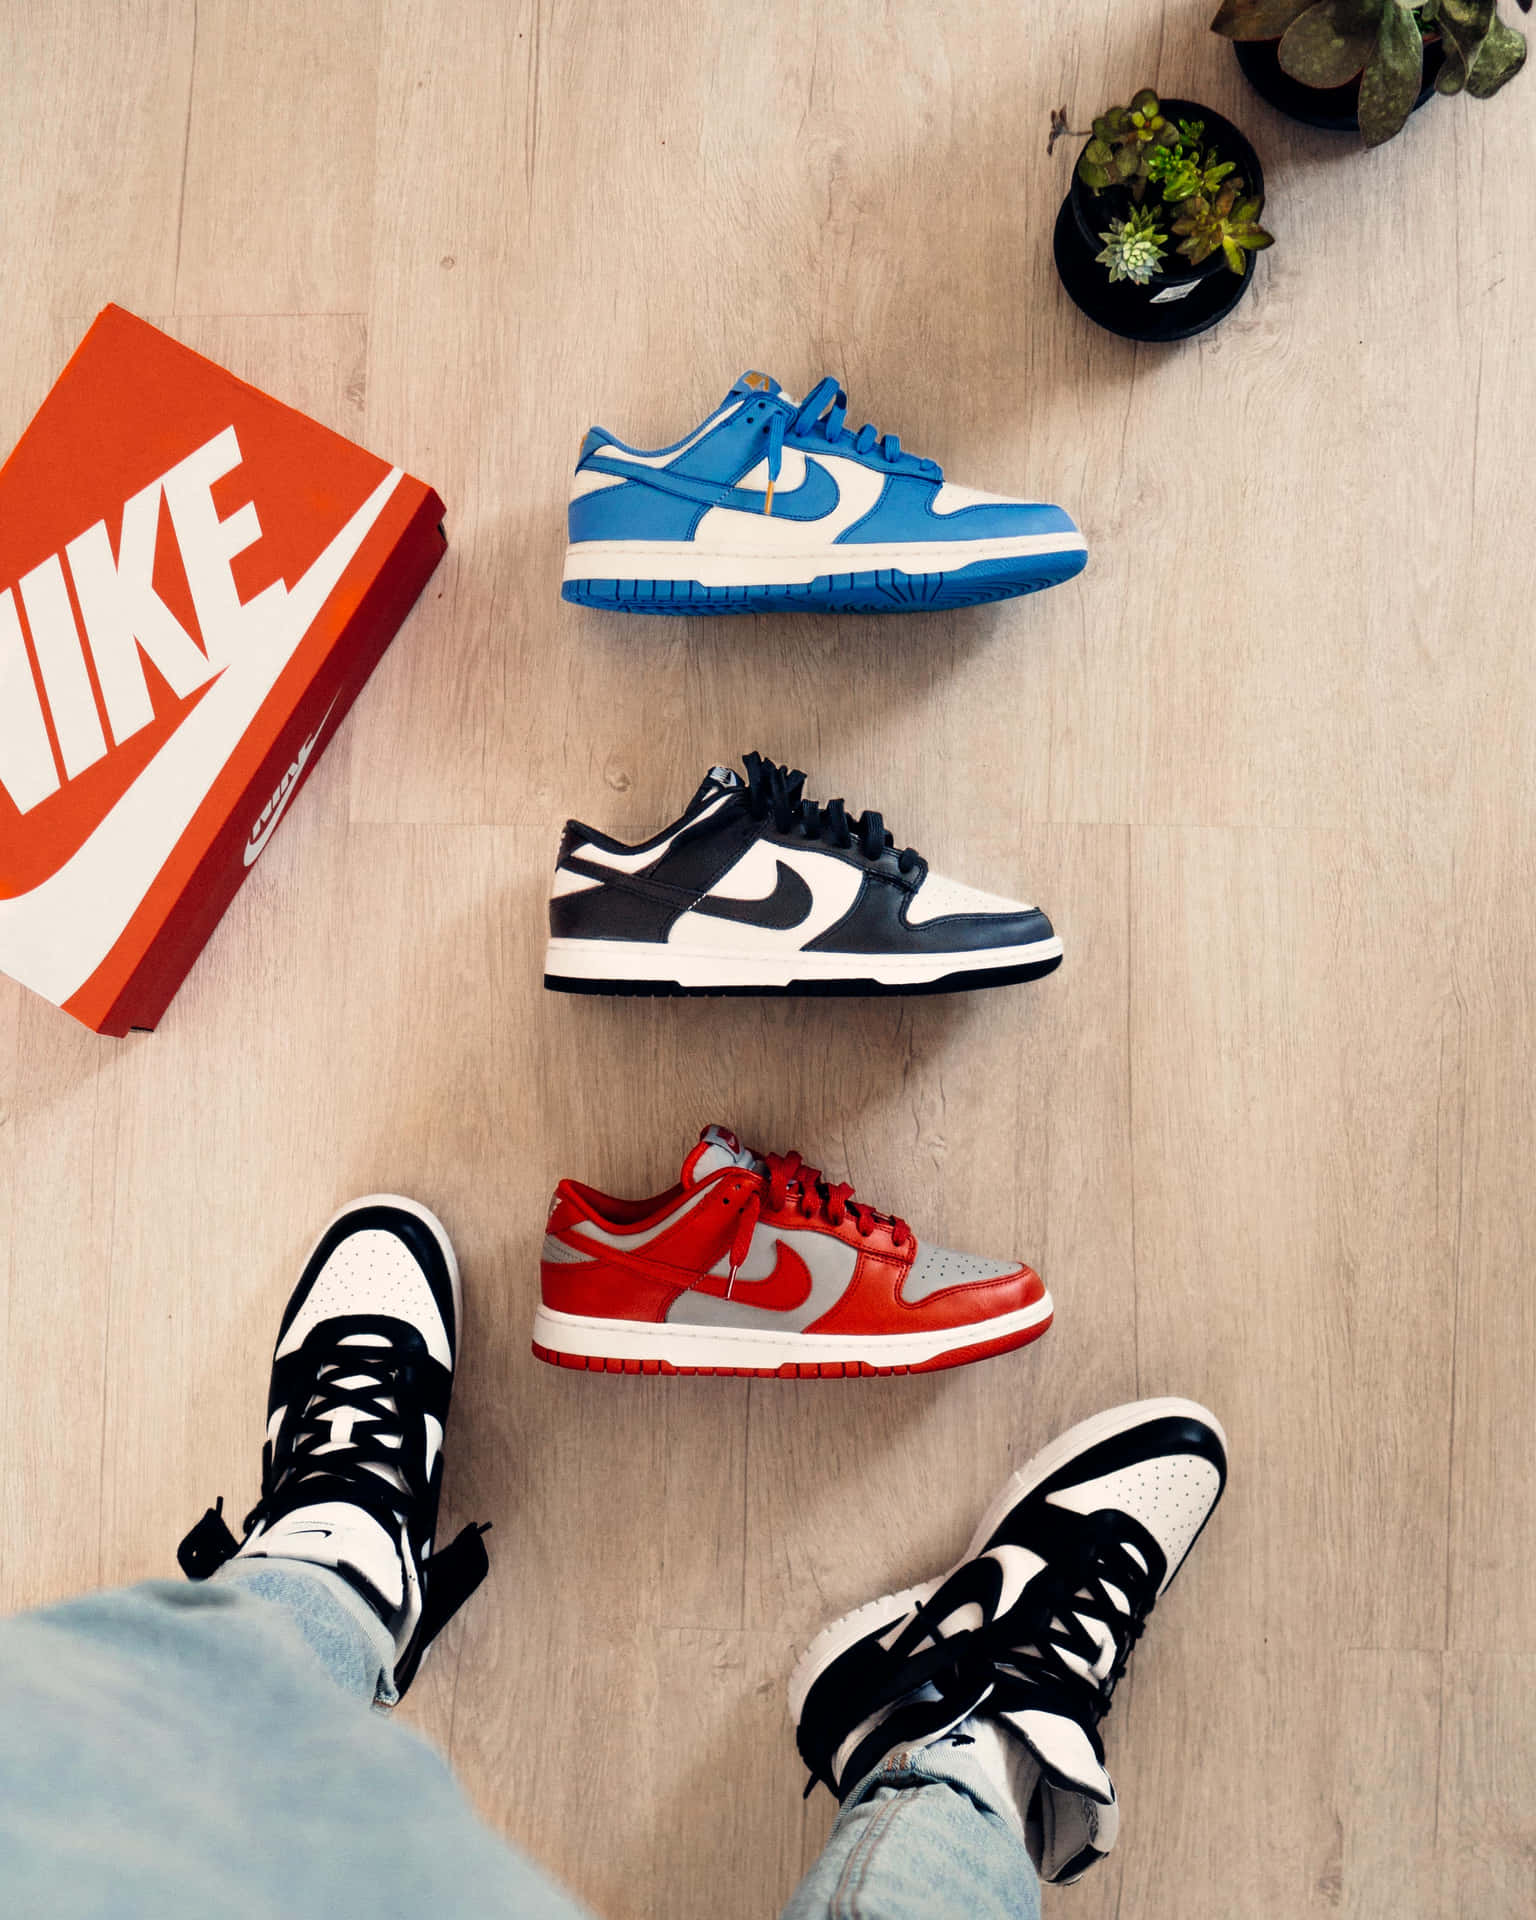 Three generations of Sneakerheads are united by their love of shoes. Wallpaper